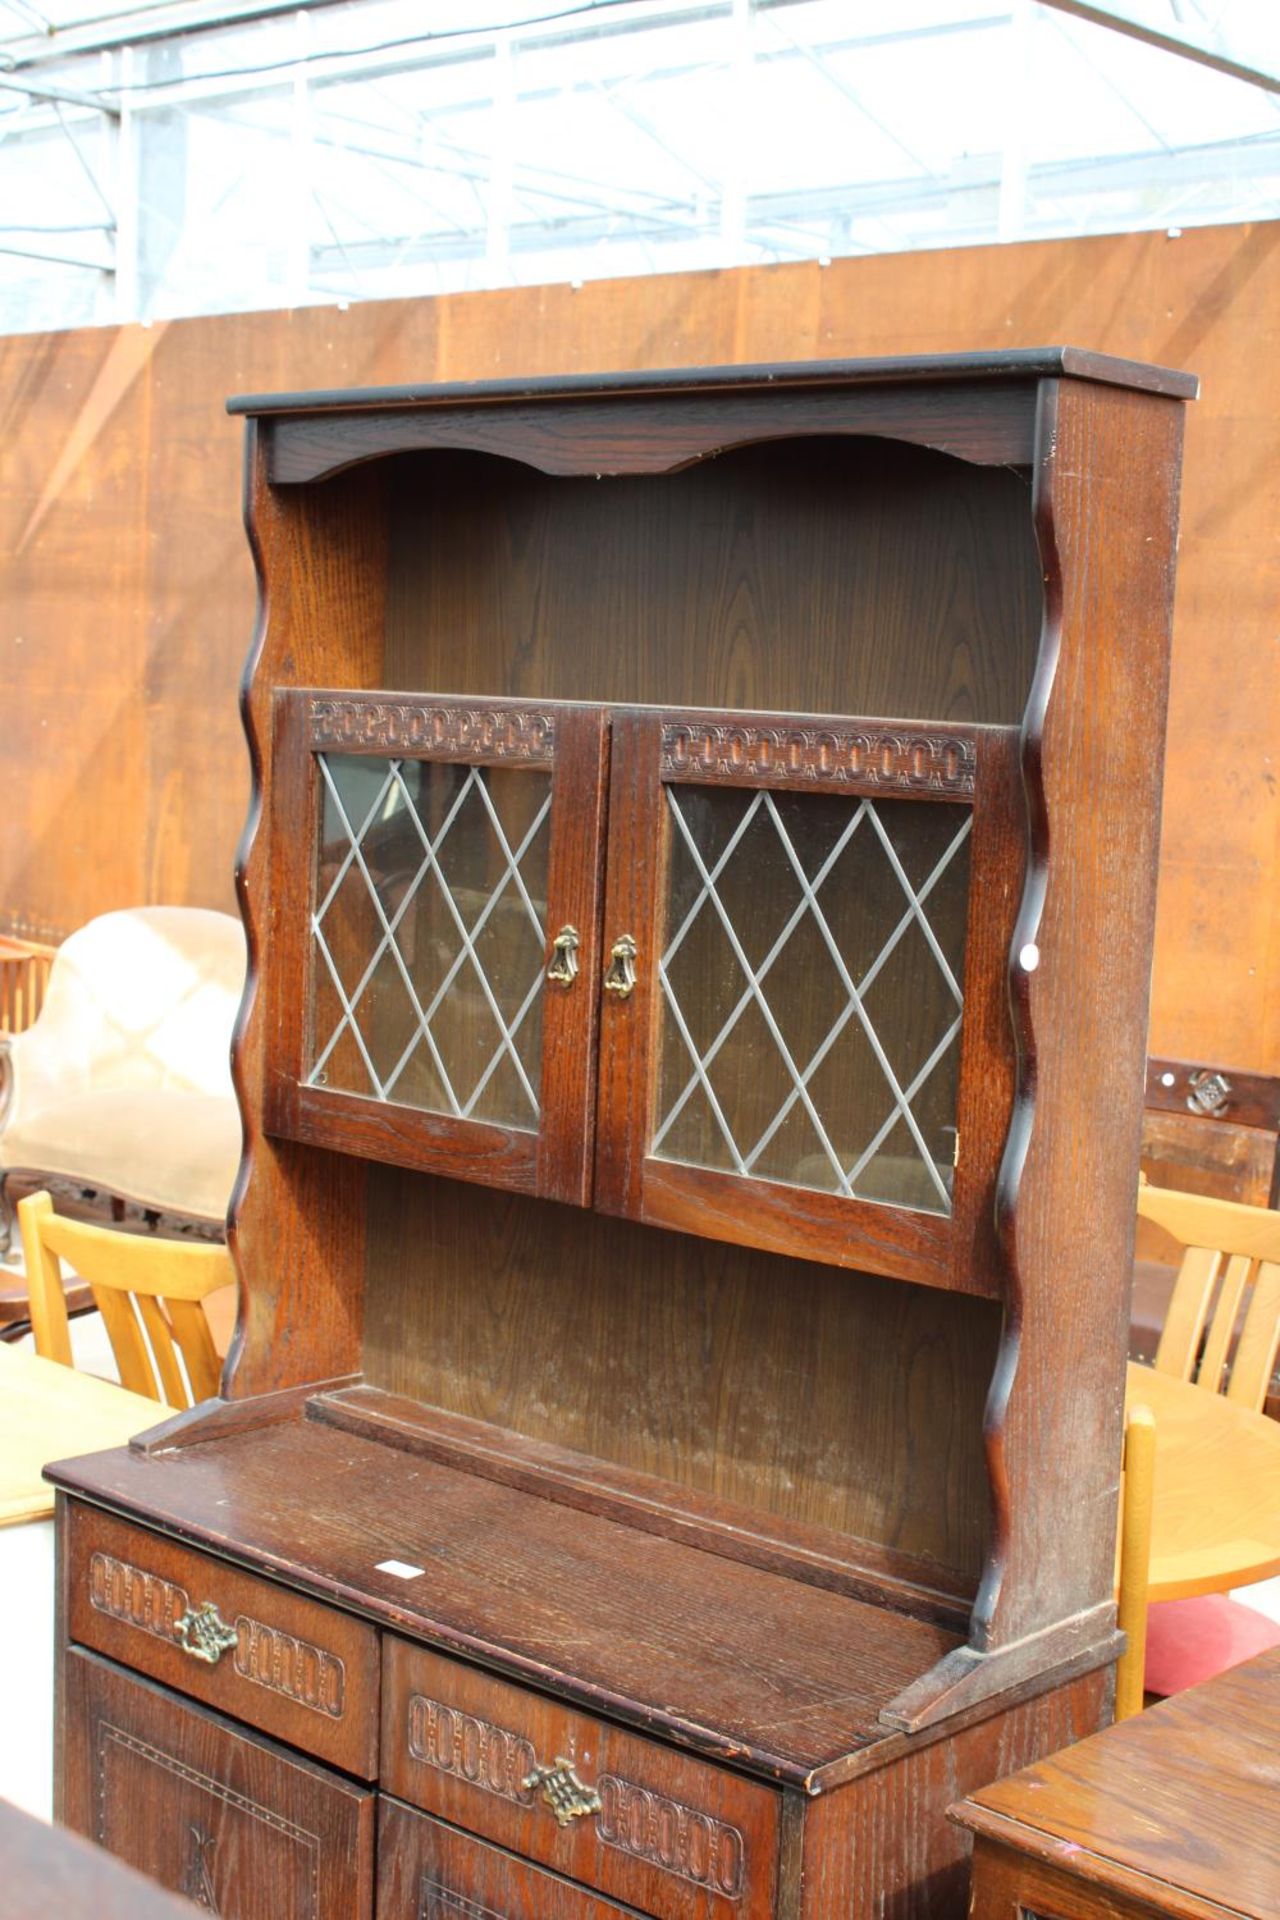 AN OAK DRESSER WITH PLATE RACK ENCLOSING 2 GLAZED AND LEADED DOORS, 36" WIDE - Image 2 of 3